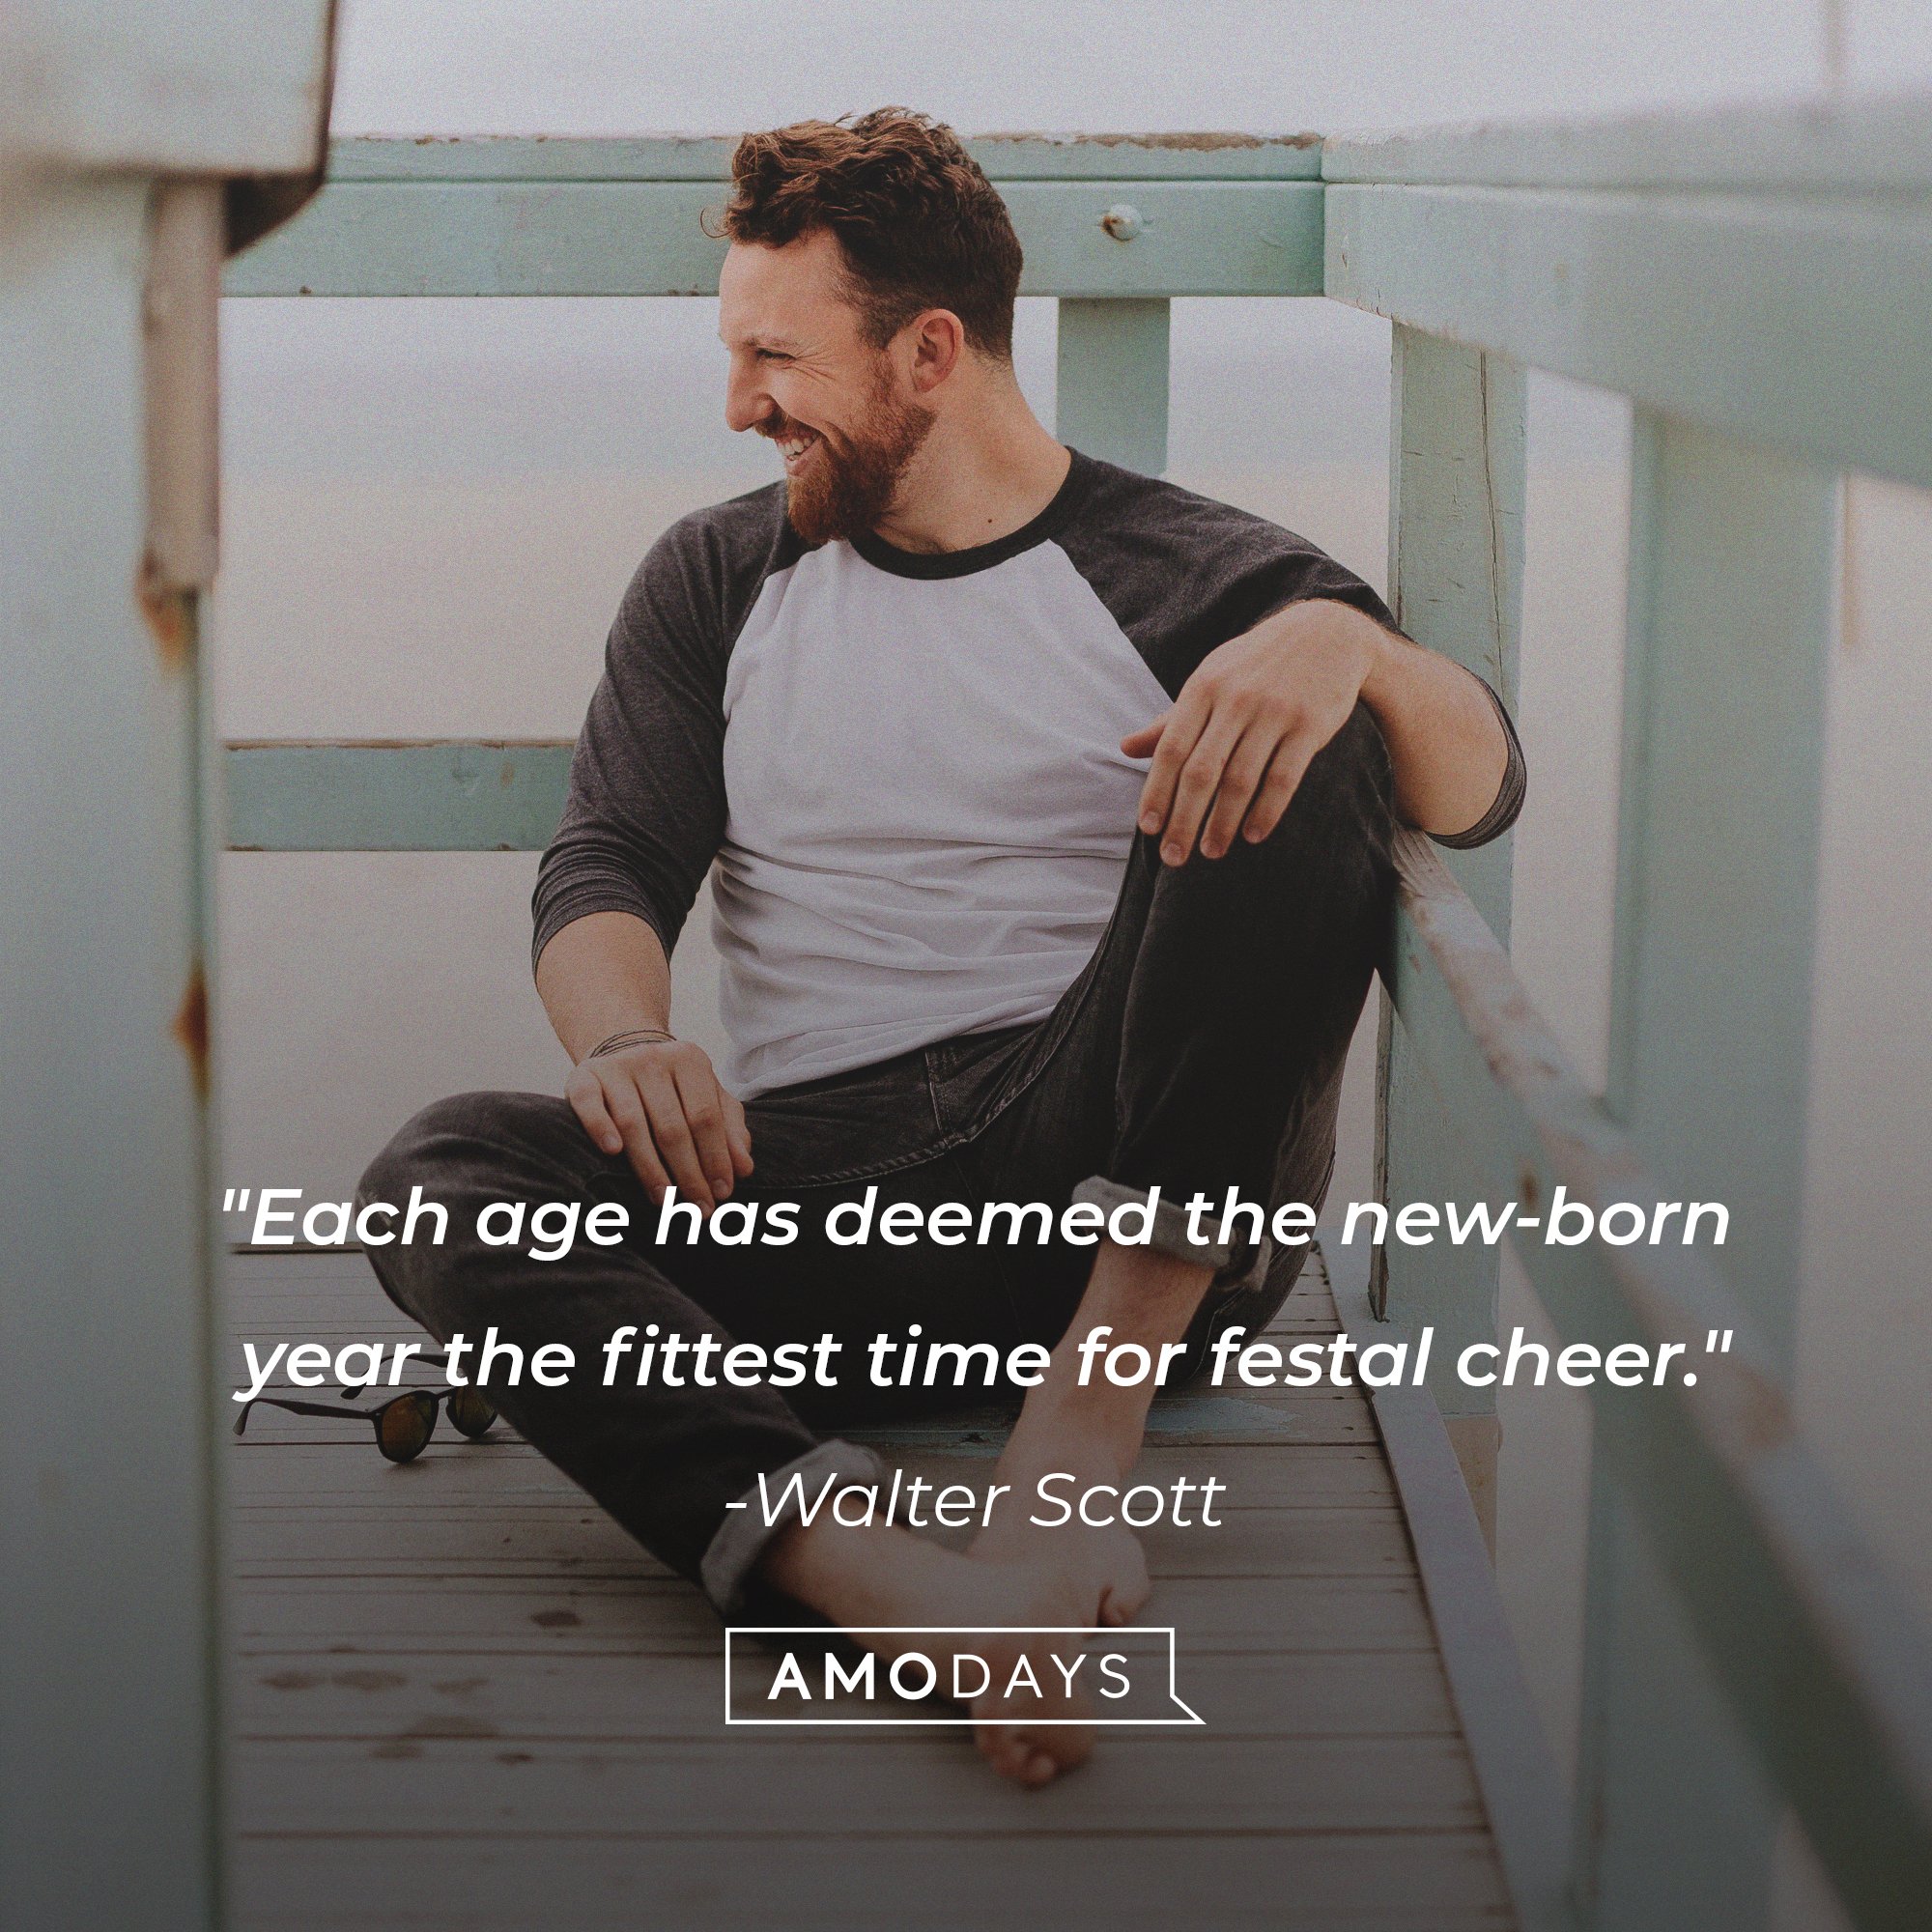 Walter Scotts’ quote: "Each age has deemed the new-born year the fittest time for festal cheer." | Image: AmoDays 